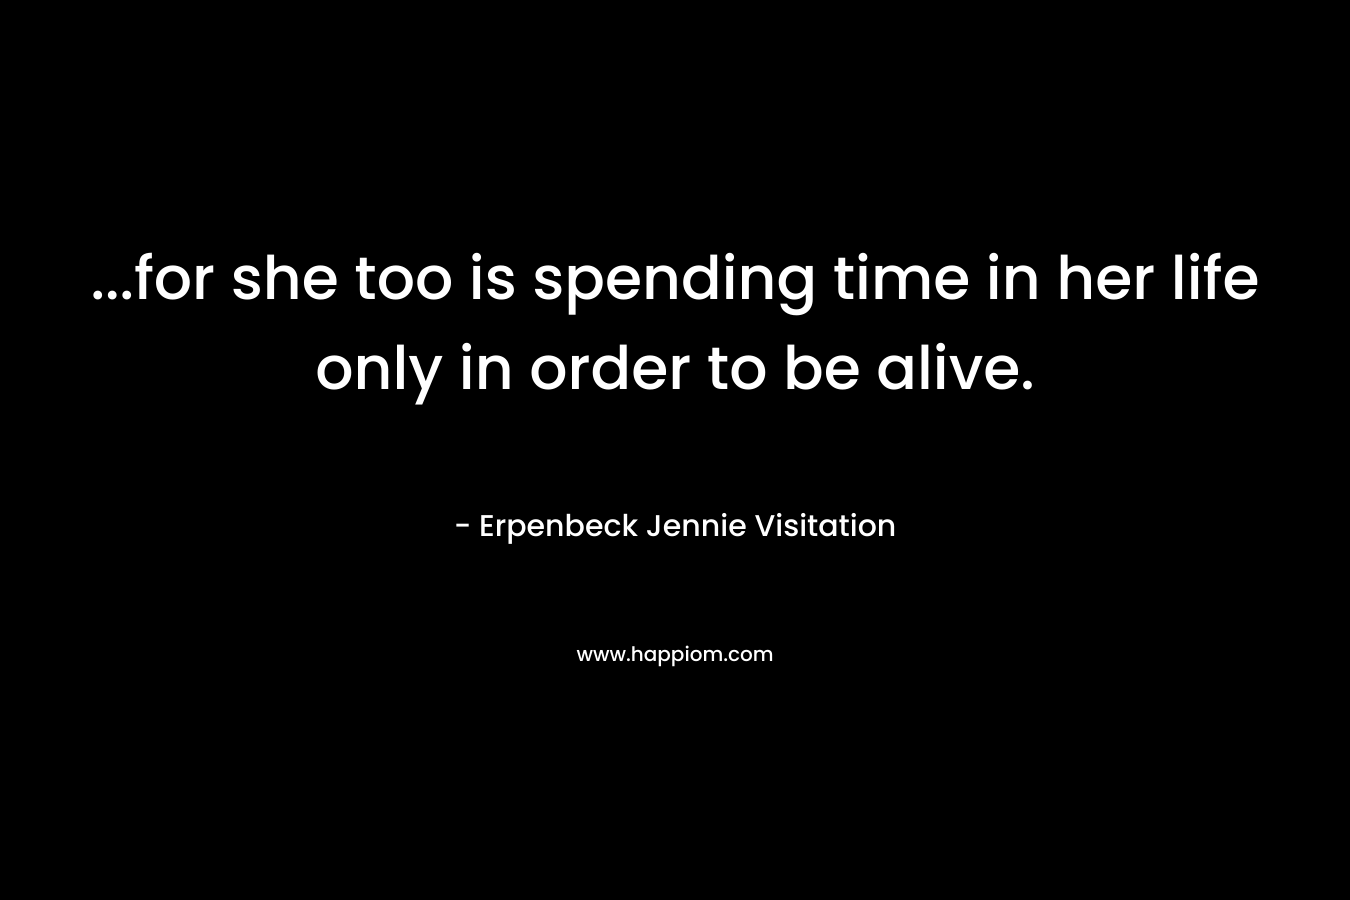 …for she too is spending time in her life only in order to be alive. – Erpenbeck Jennie Visitation